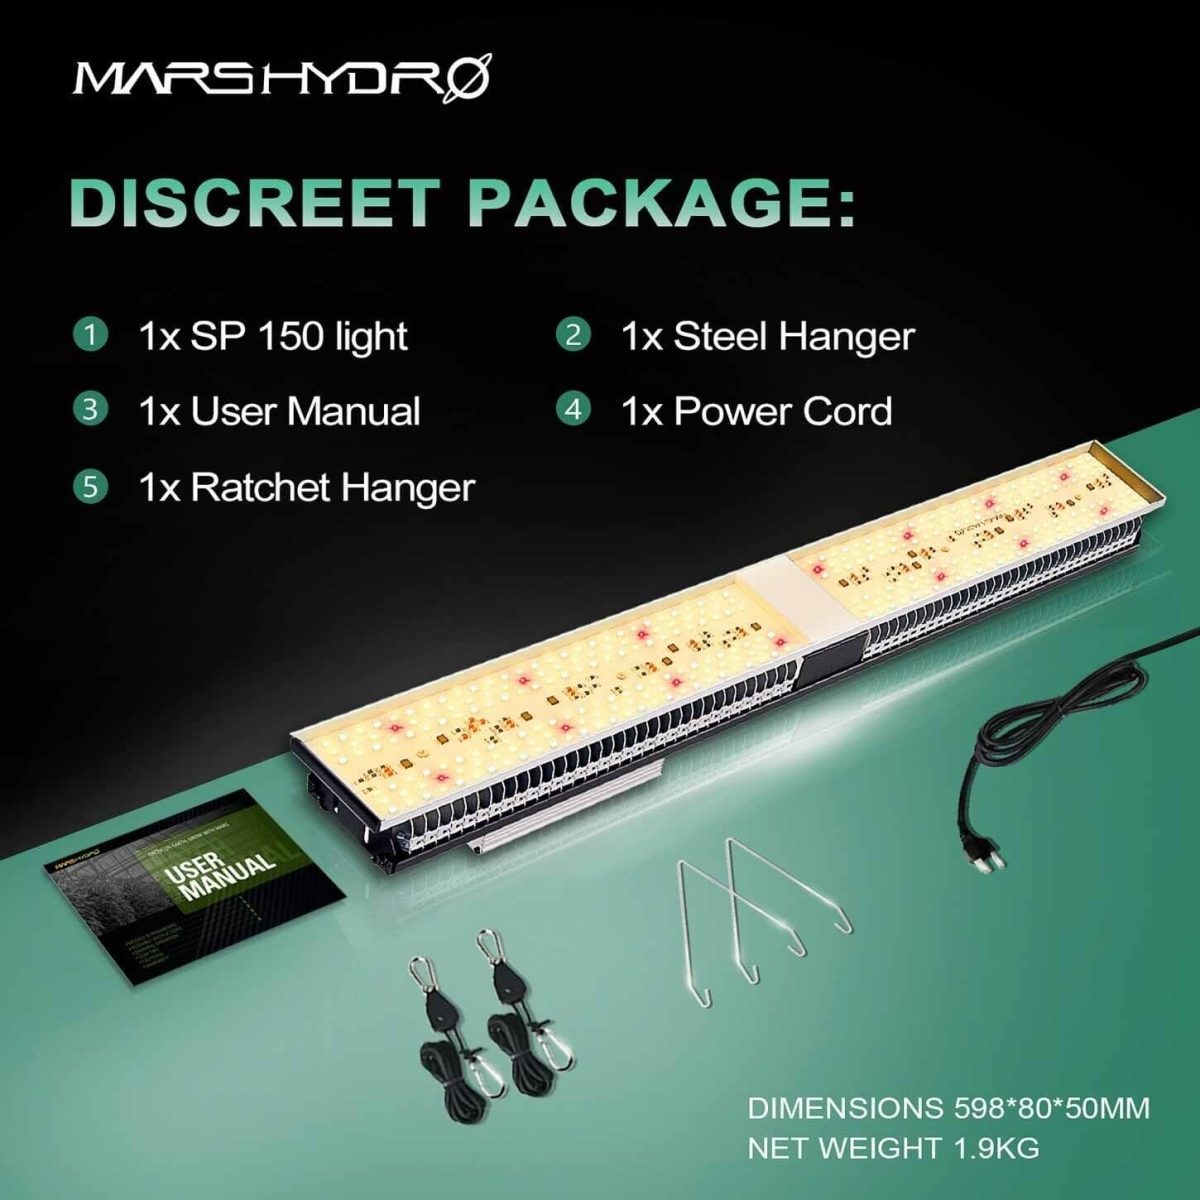 Discreet package includes sp150led, steel hanger, user manual, power cord and ratchet hanger